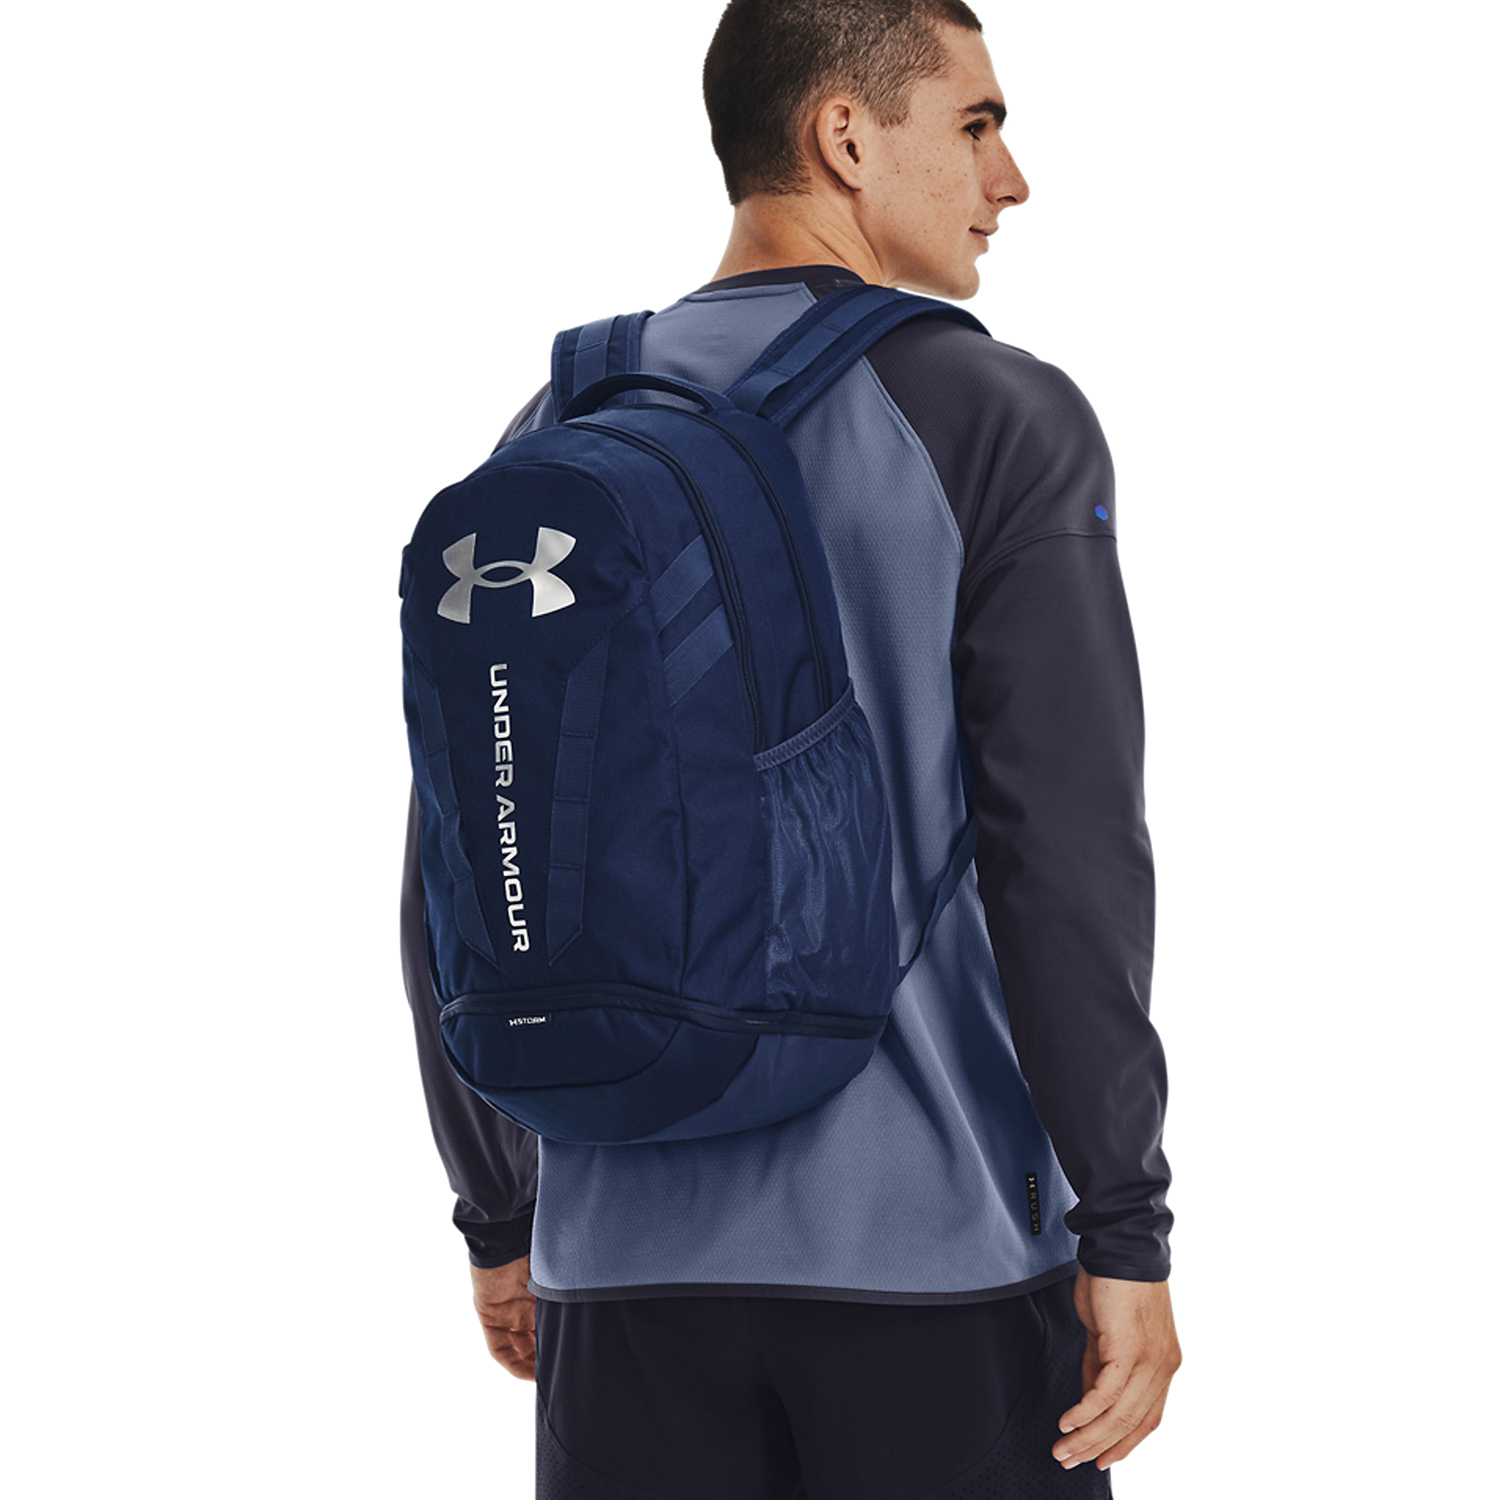 Under Armour Hustle 5.0 Backpack - Navy/Academy/Silver